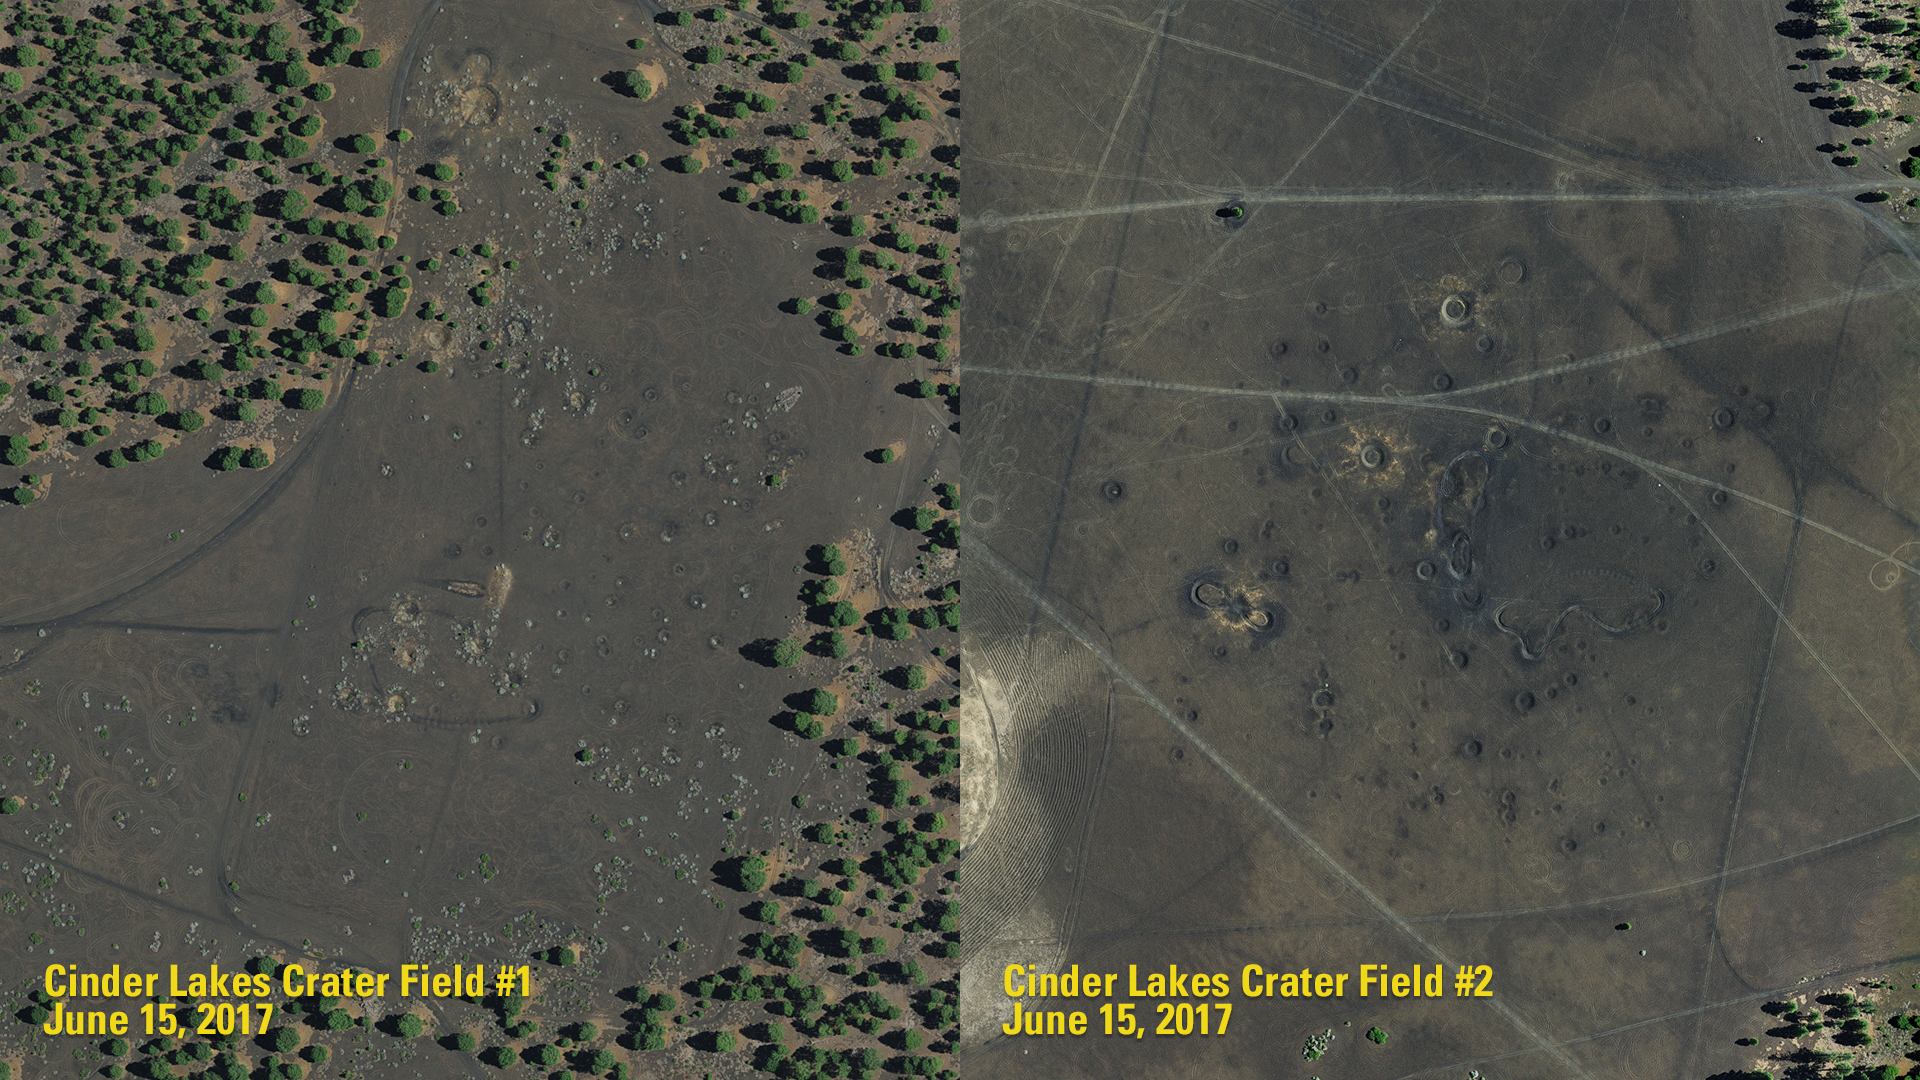 Cinder Lake crater fields - 2017